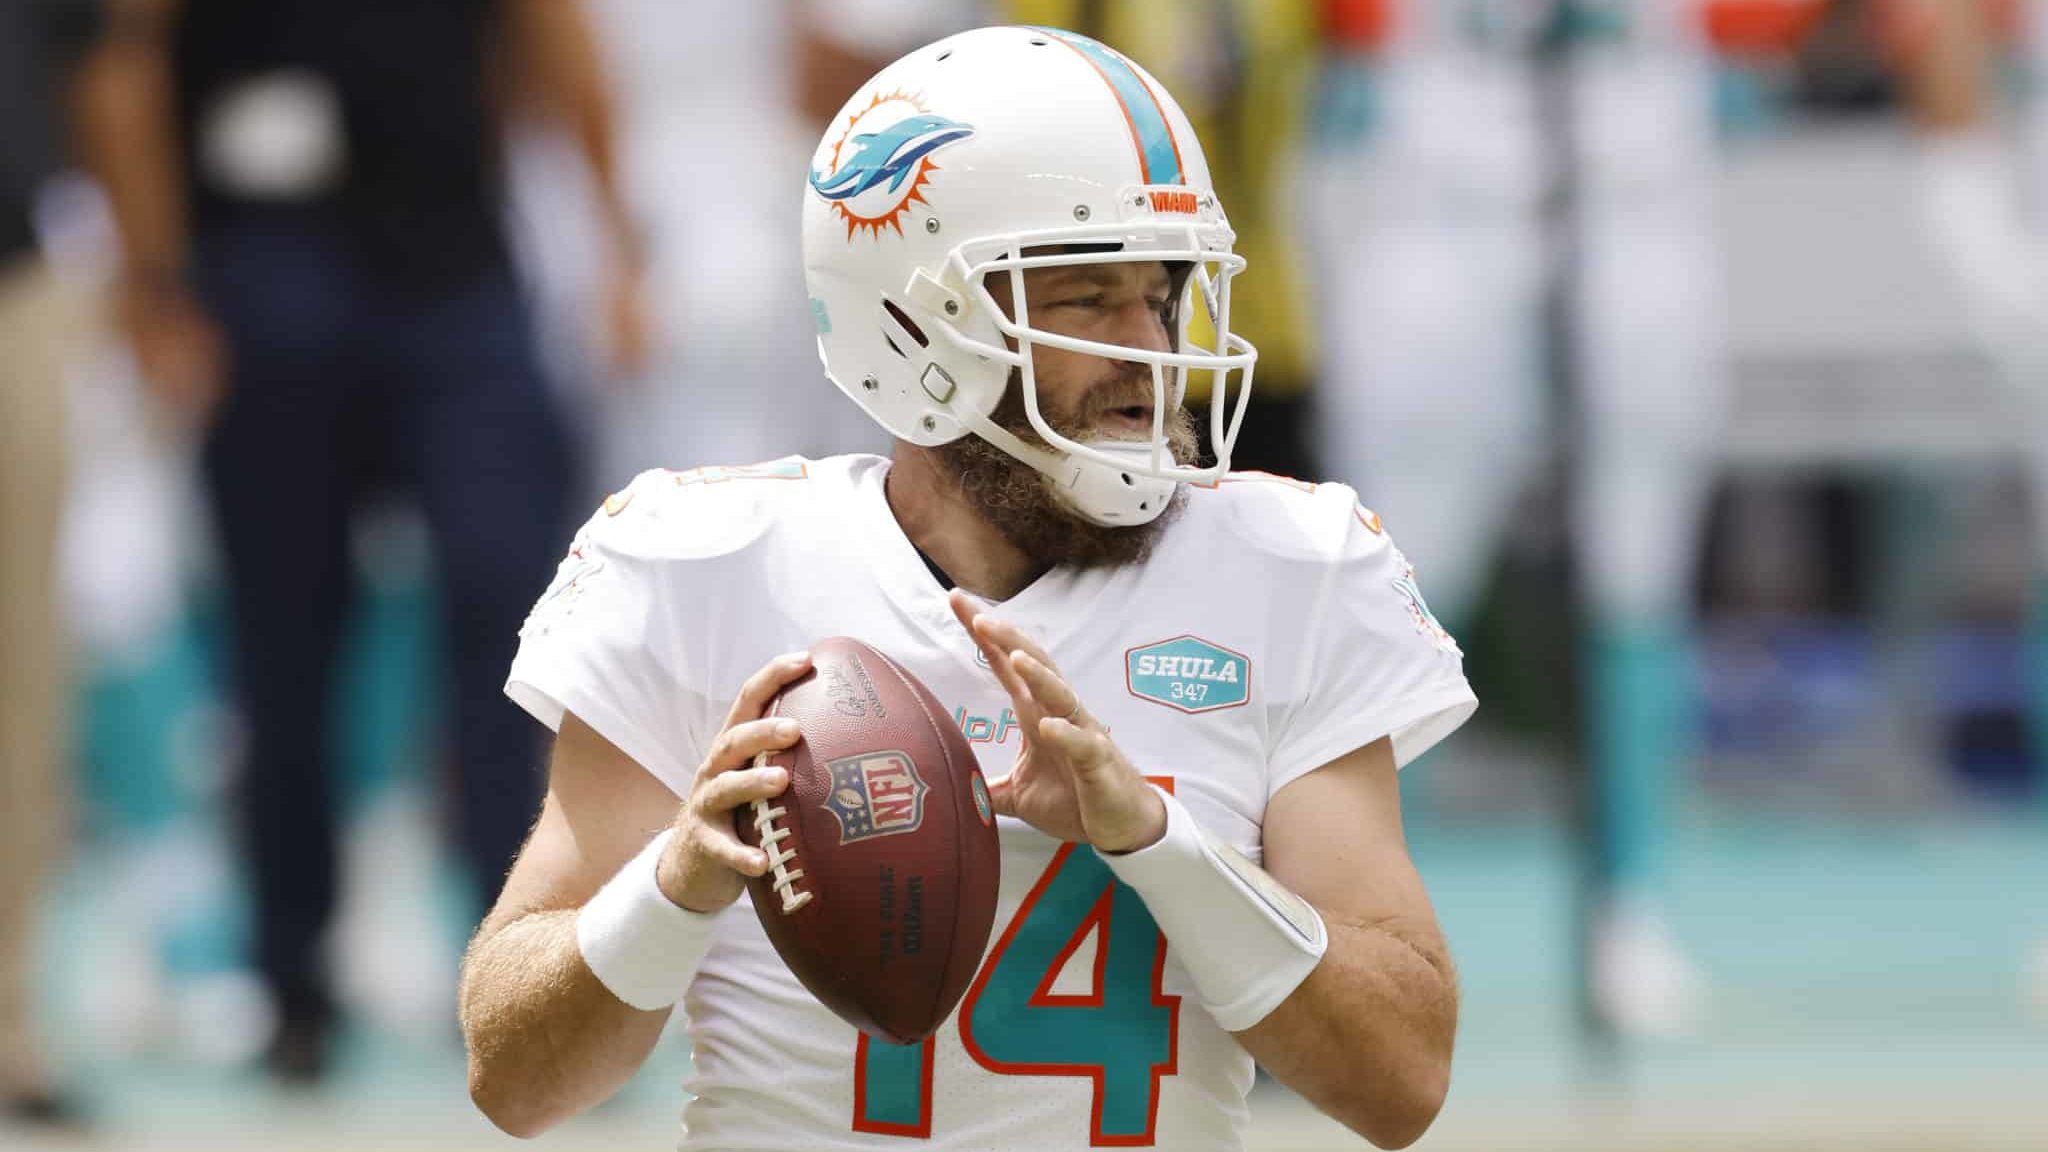 MIAMI GARDENS, FLORIDA - OCTOBER 04: Ryan Fitzpatrick #14 of the Miami Dolphins looks to pass against the Seattle Seahawks during the first half at Hard Rock Stadium on October 04, 2020 in Miami Gardens, Florida.